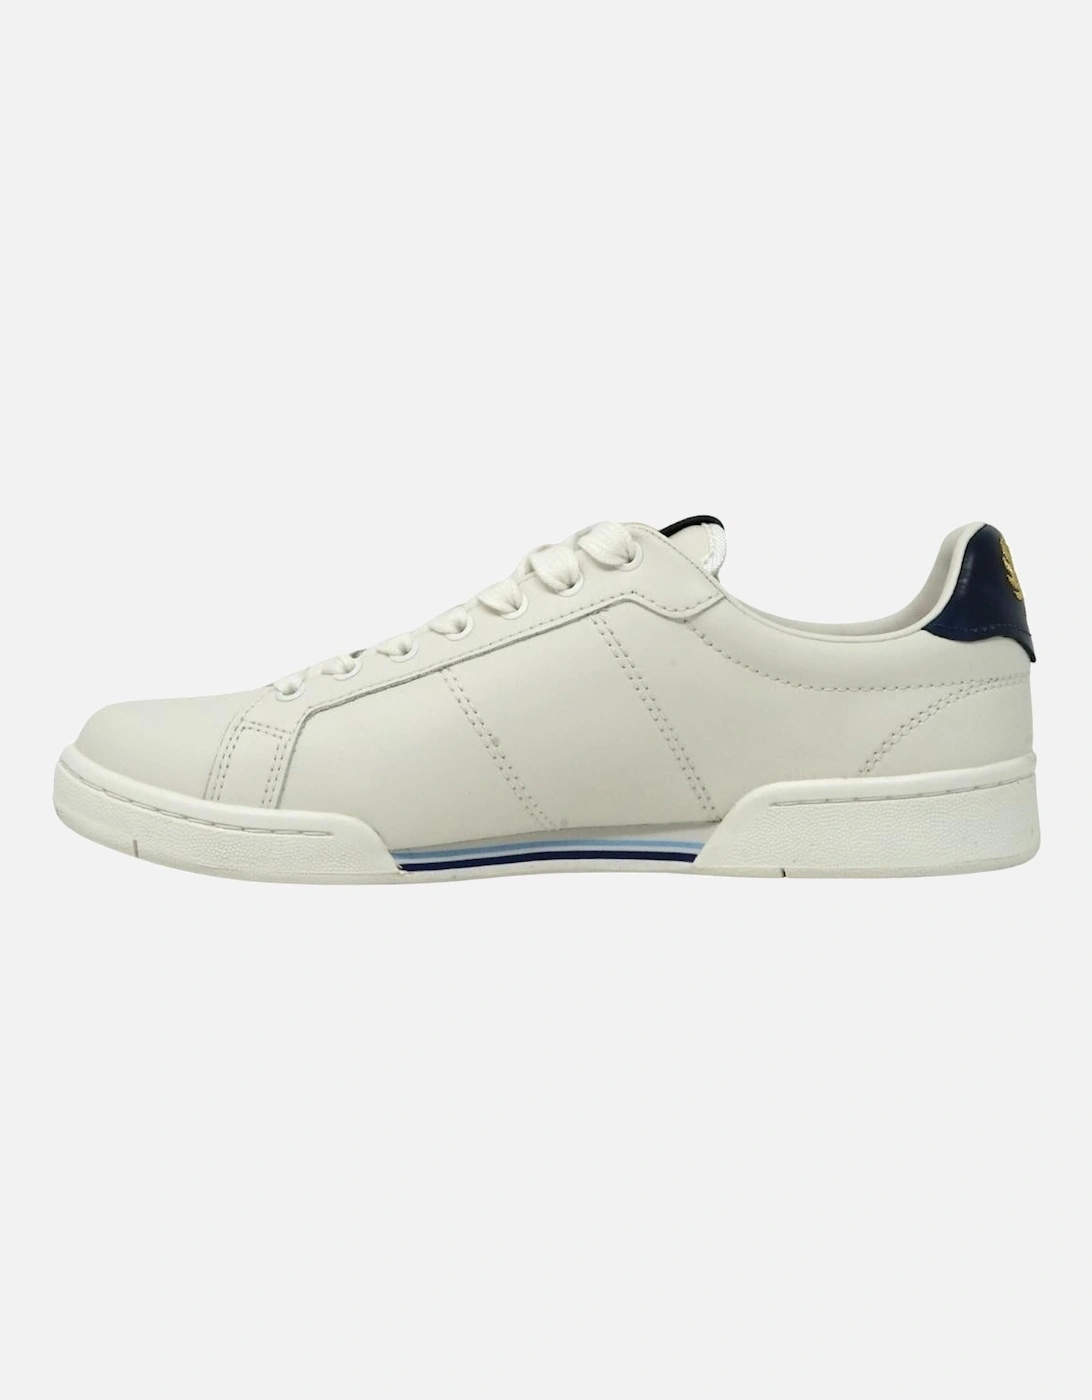 B1272 303 White Leather Trainers